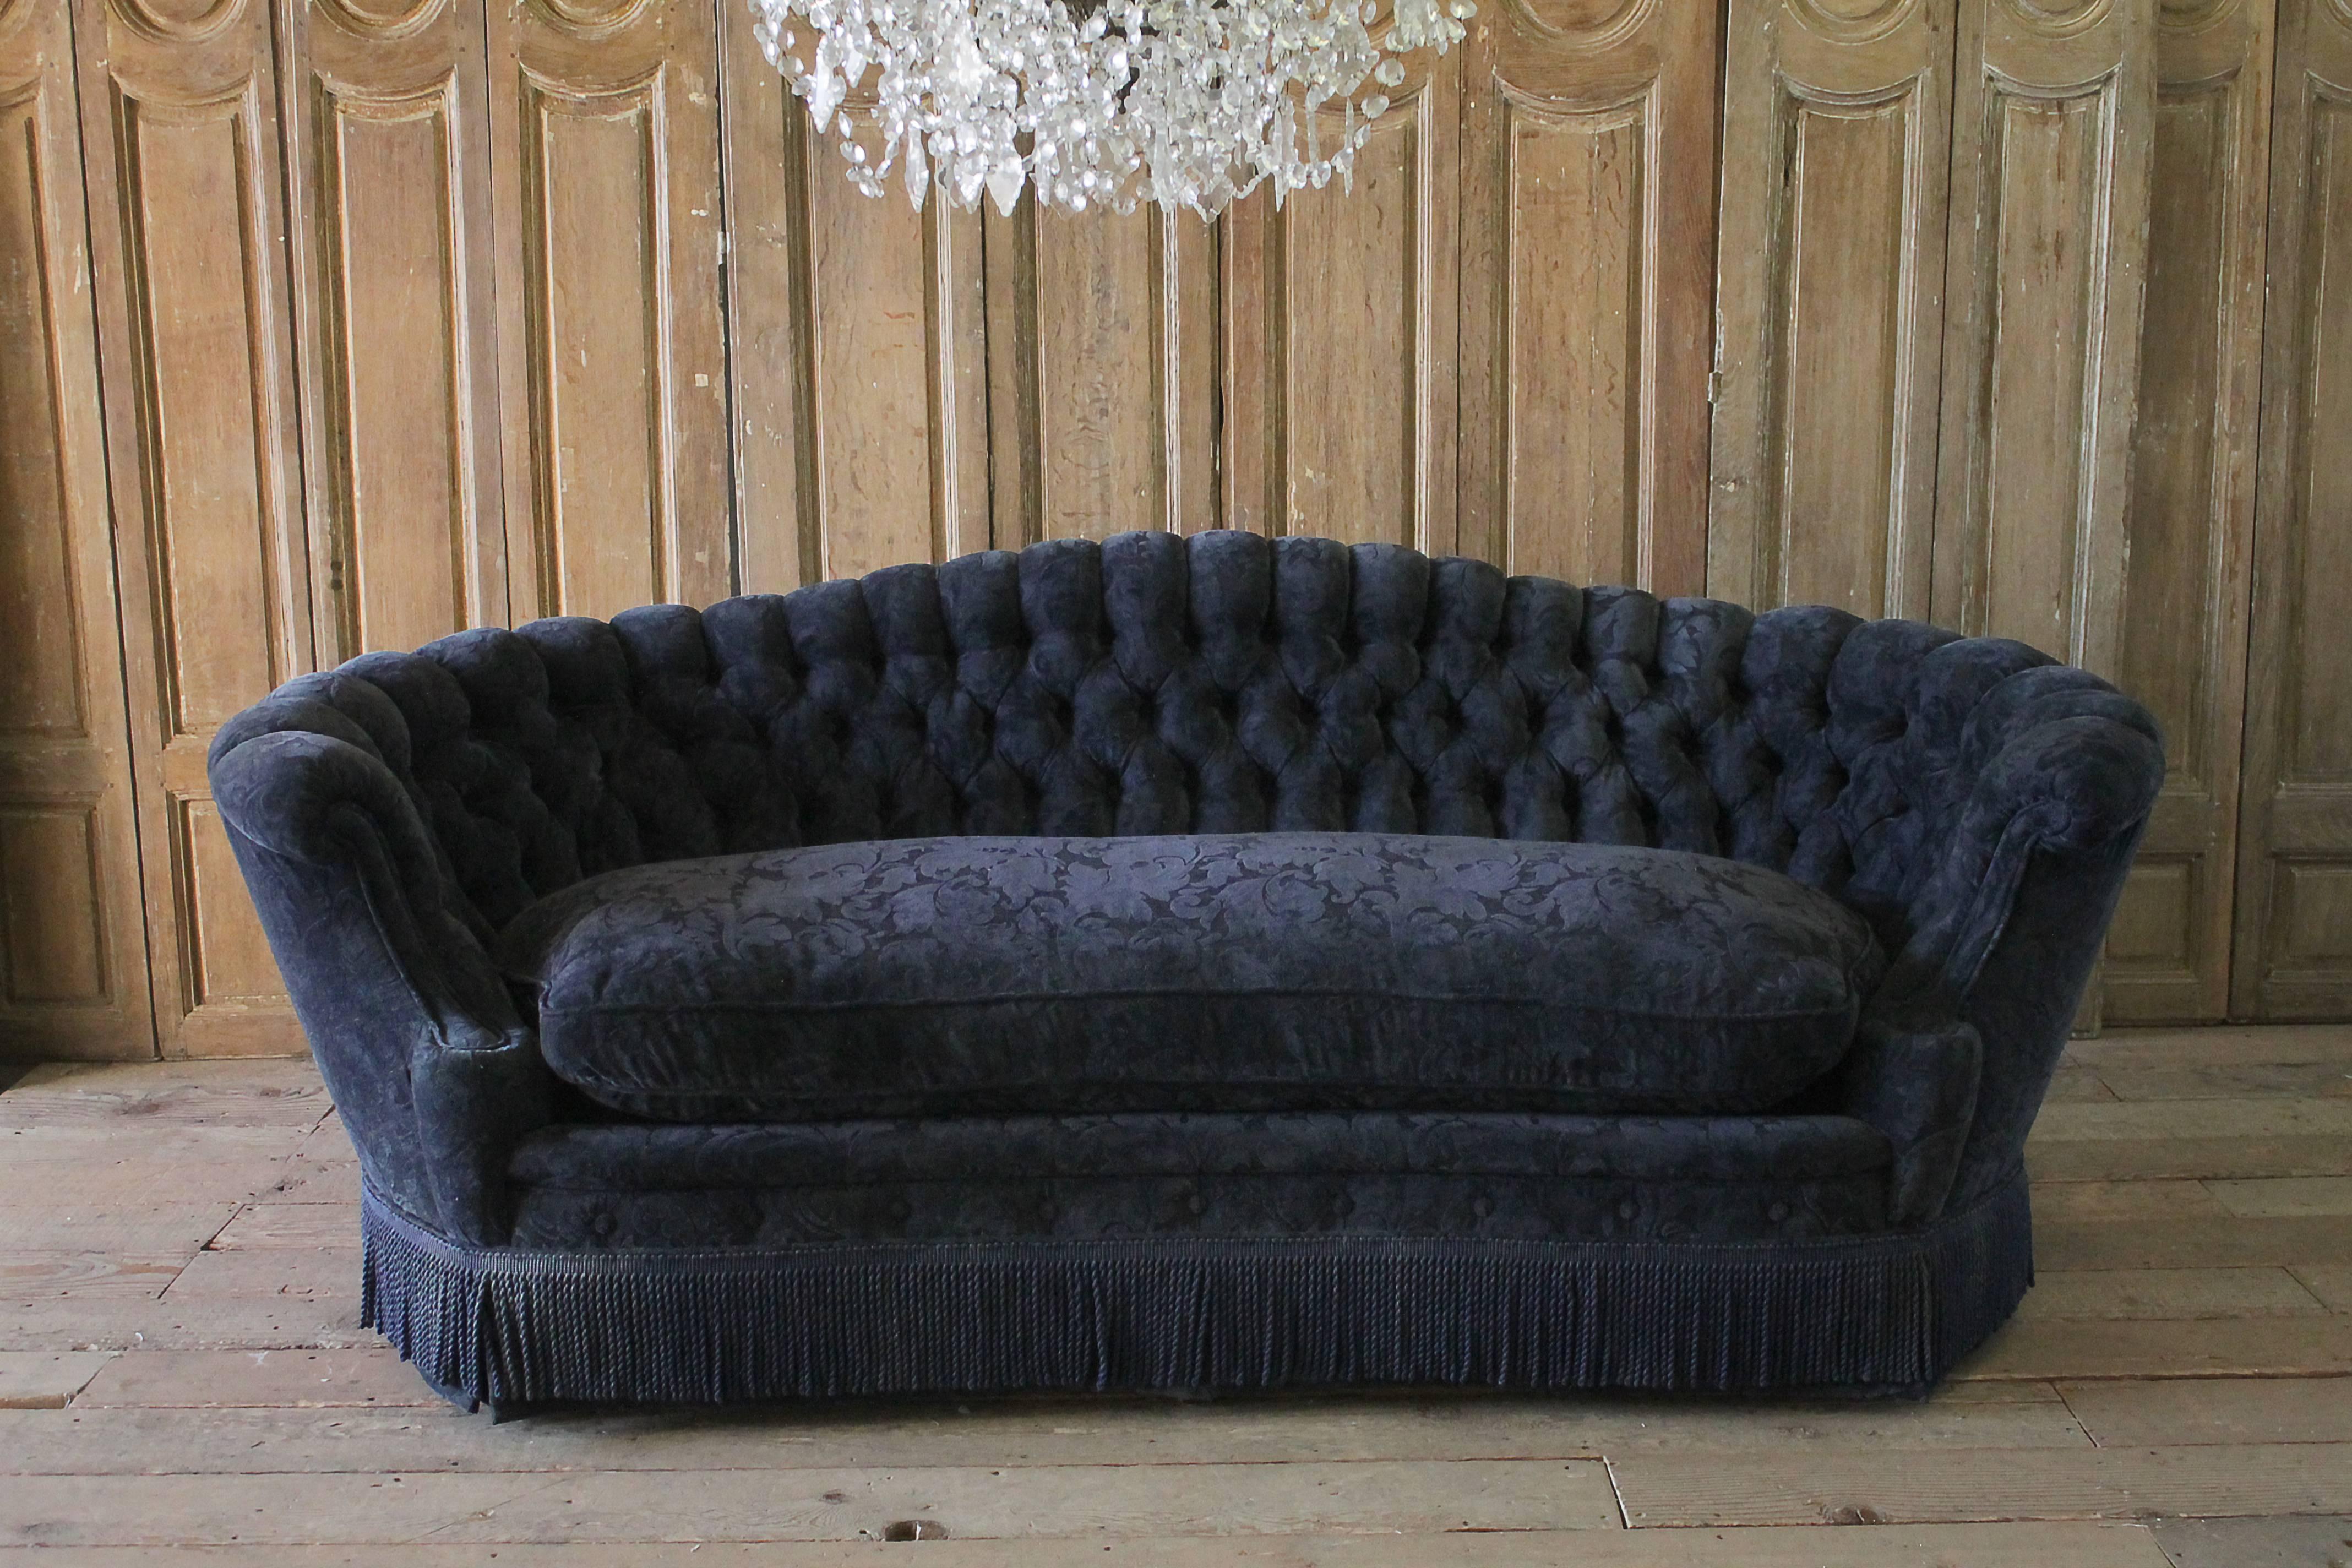 Vintage button tufted sofa in the Victorian style. A large plump down cushion, very comfortable, a solid frame. This has a deep navy blue velvet chenille upholstery that is in good condition. Slight areas of fading, or use. We offer reupholstery,